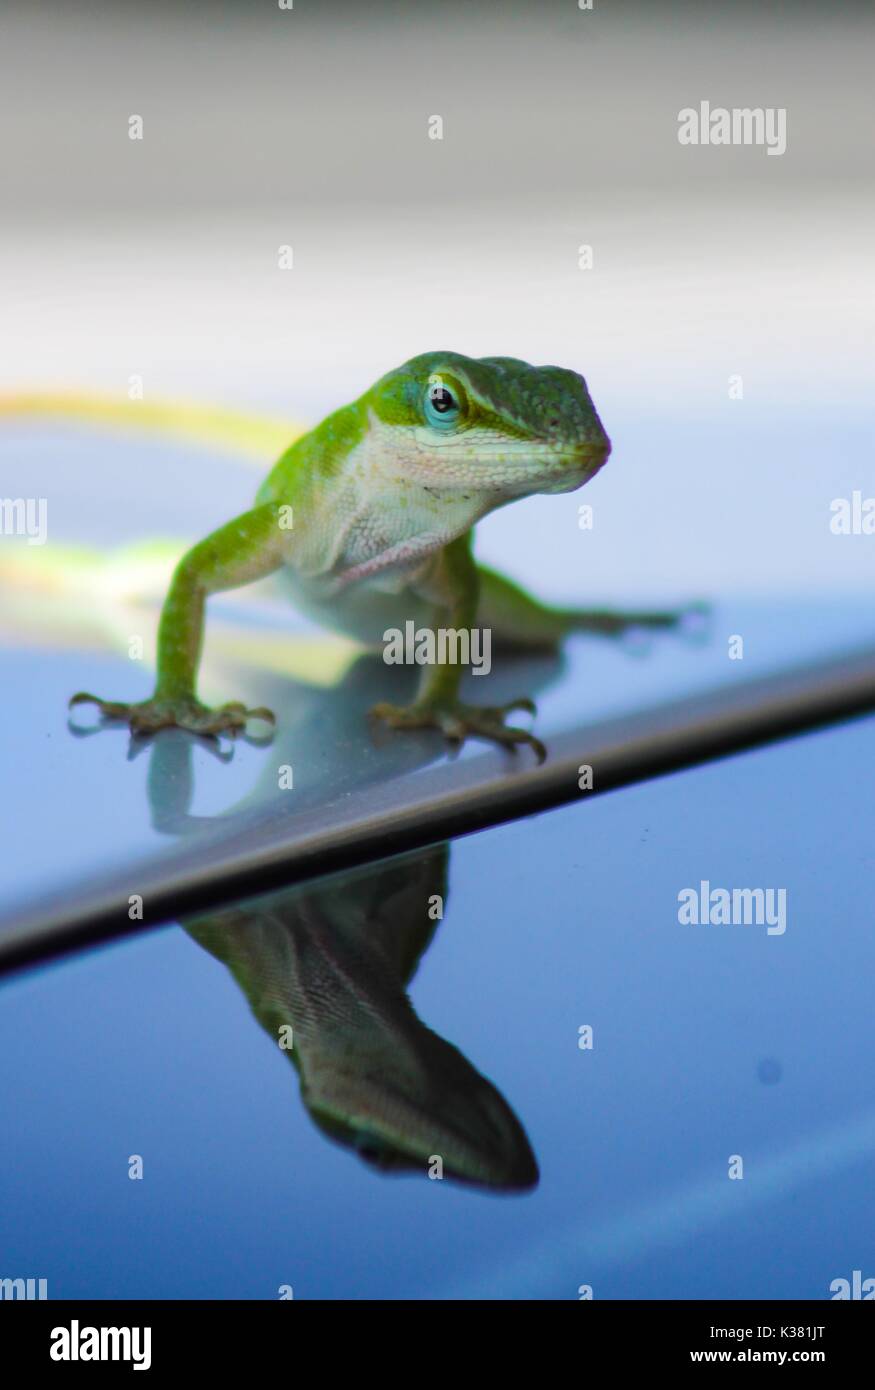 A Carolina Green Anole gecko lizard sitting on a car and his reflection appearing on the window. Stock Photo